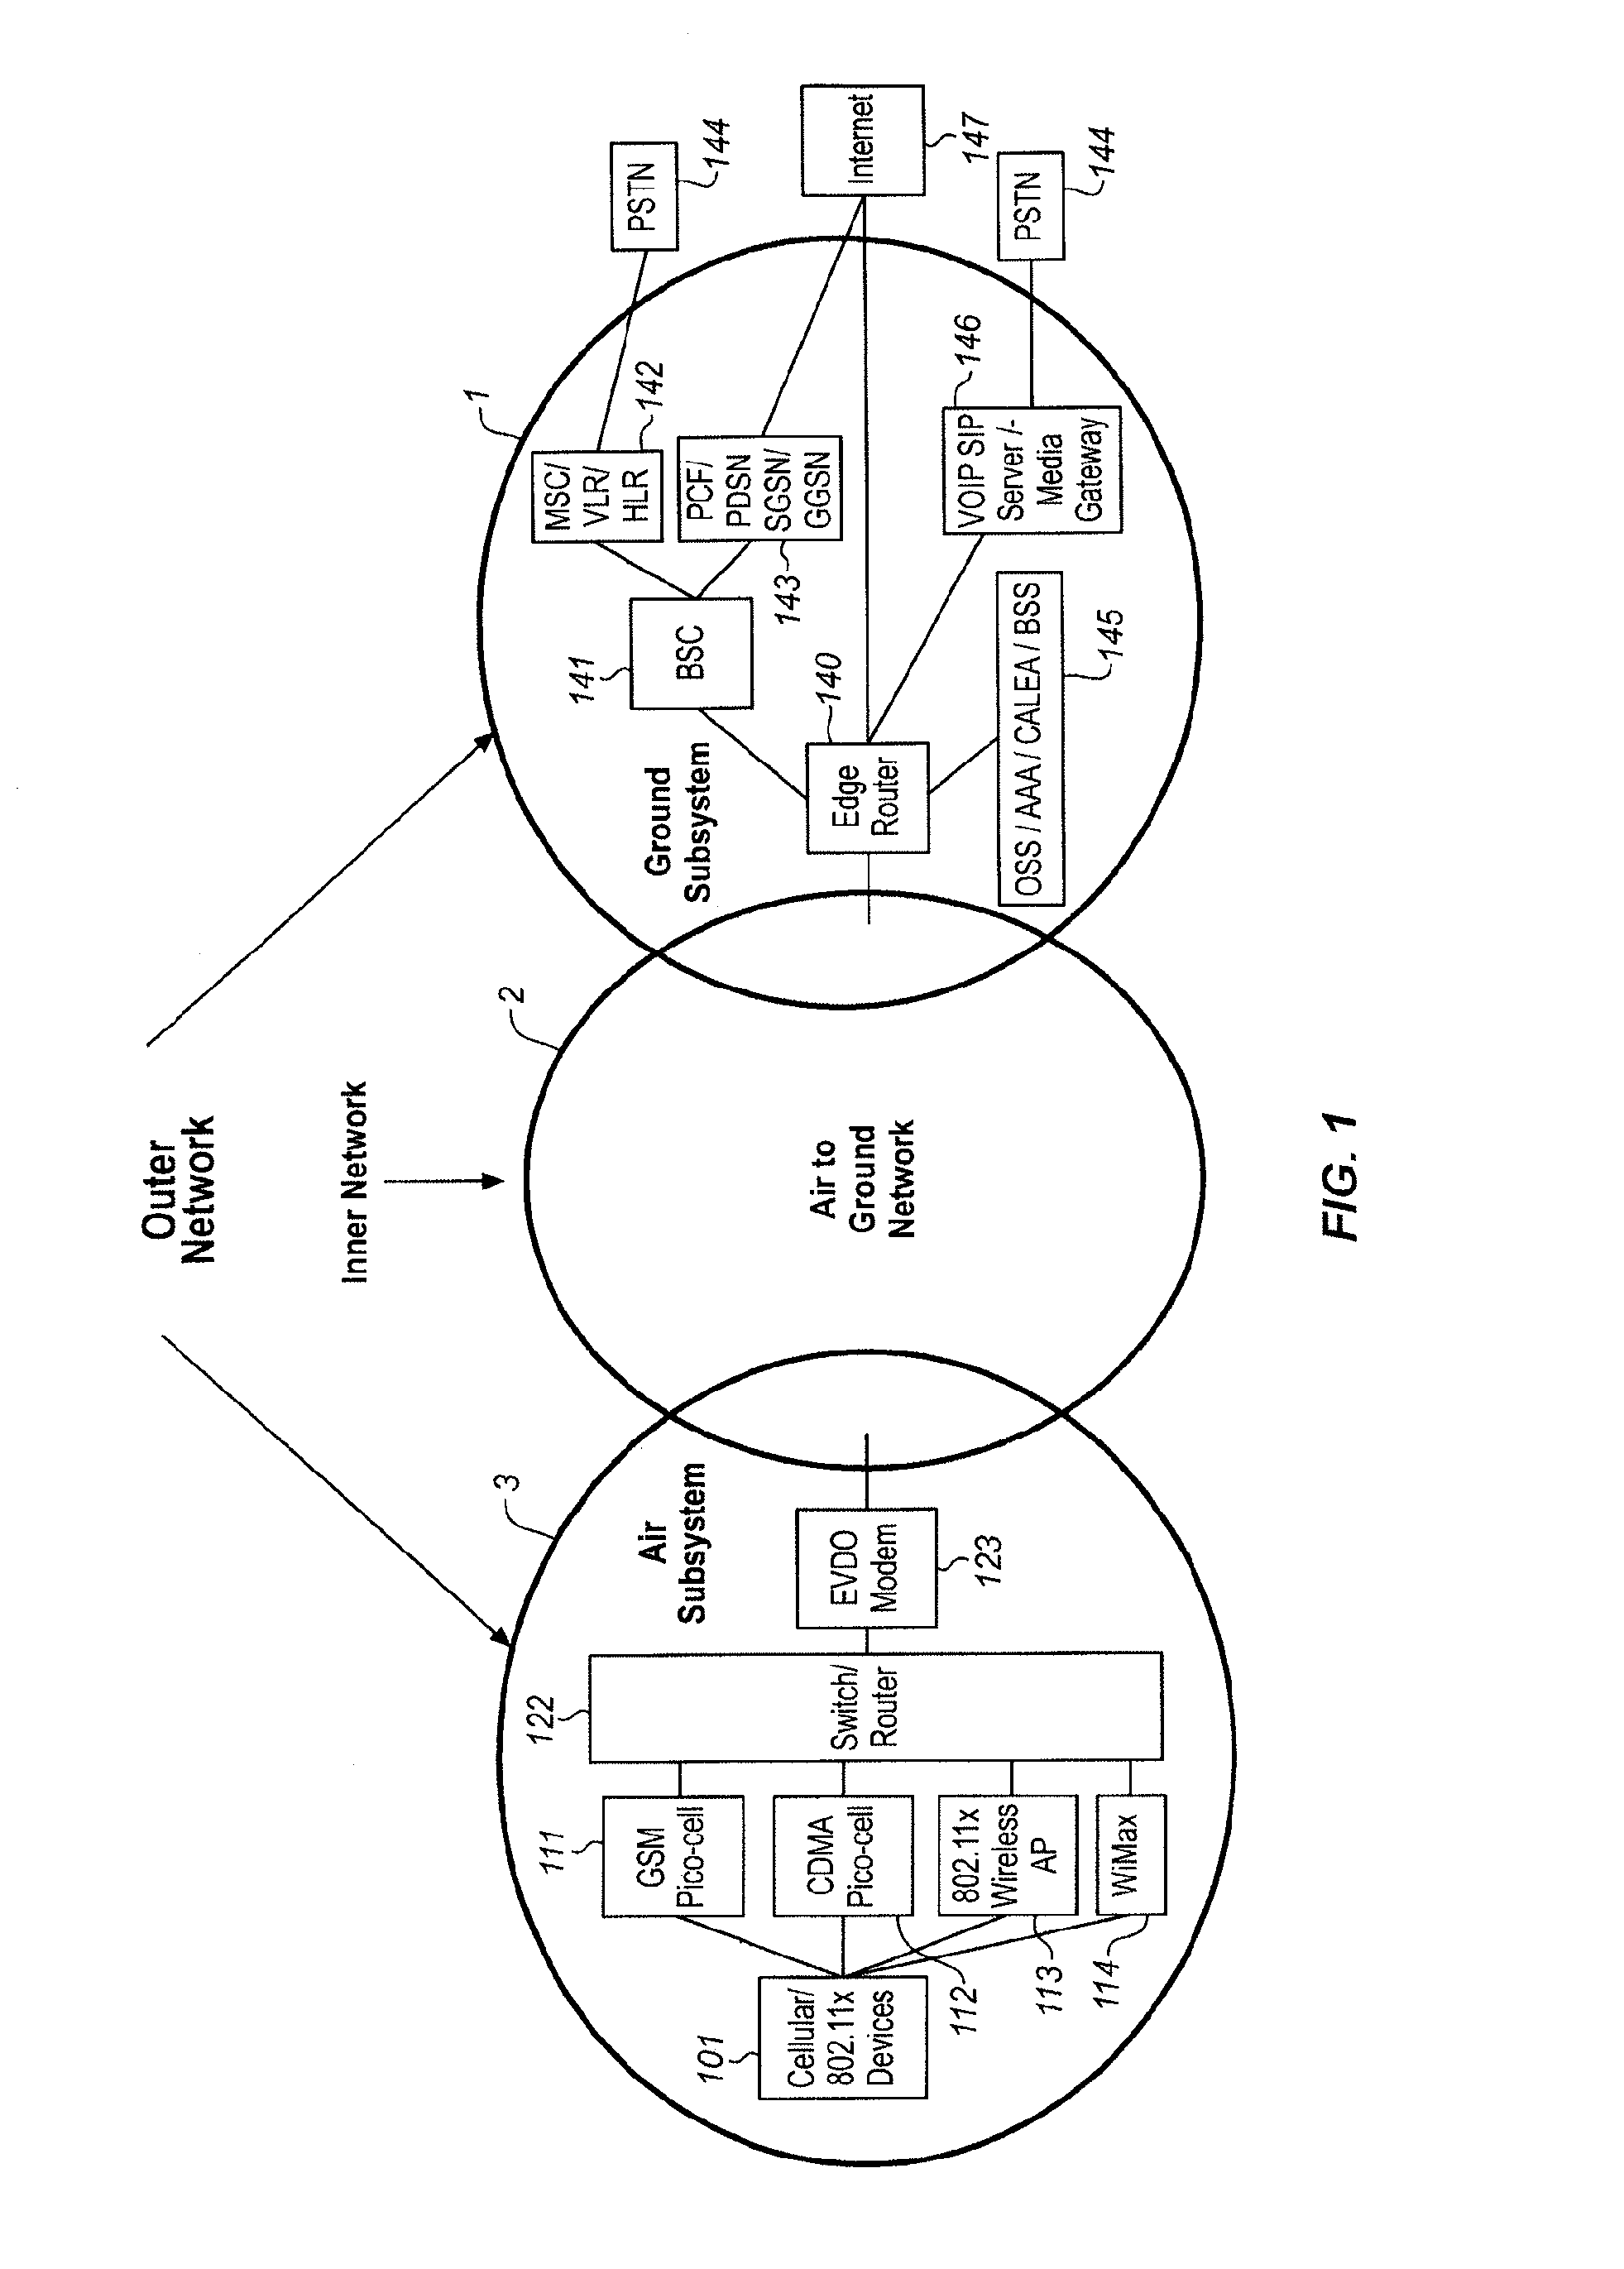 System for creating an aircraft-based internet protocol subnet in an airborne wireless cellular network